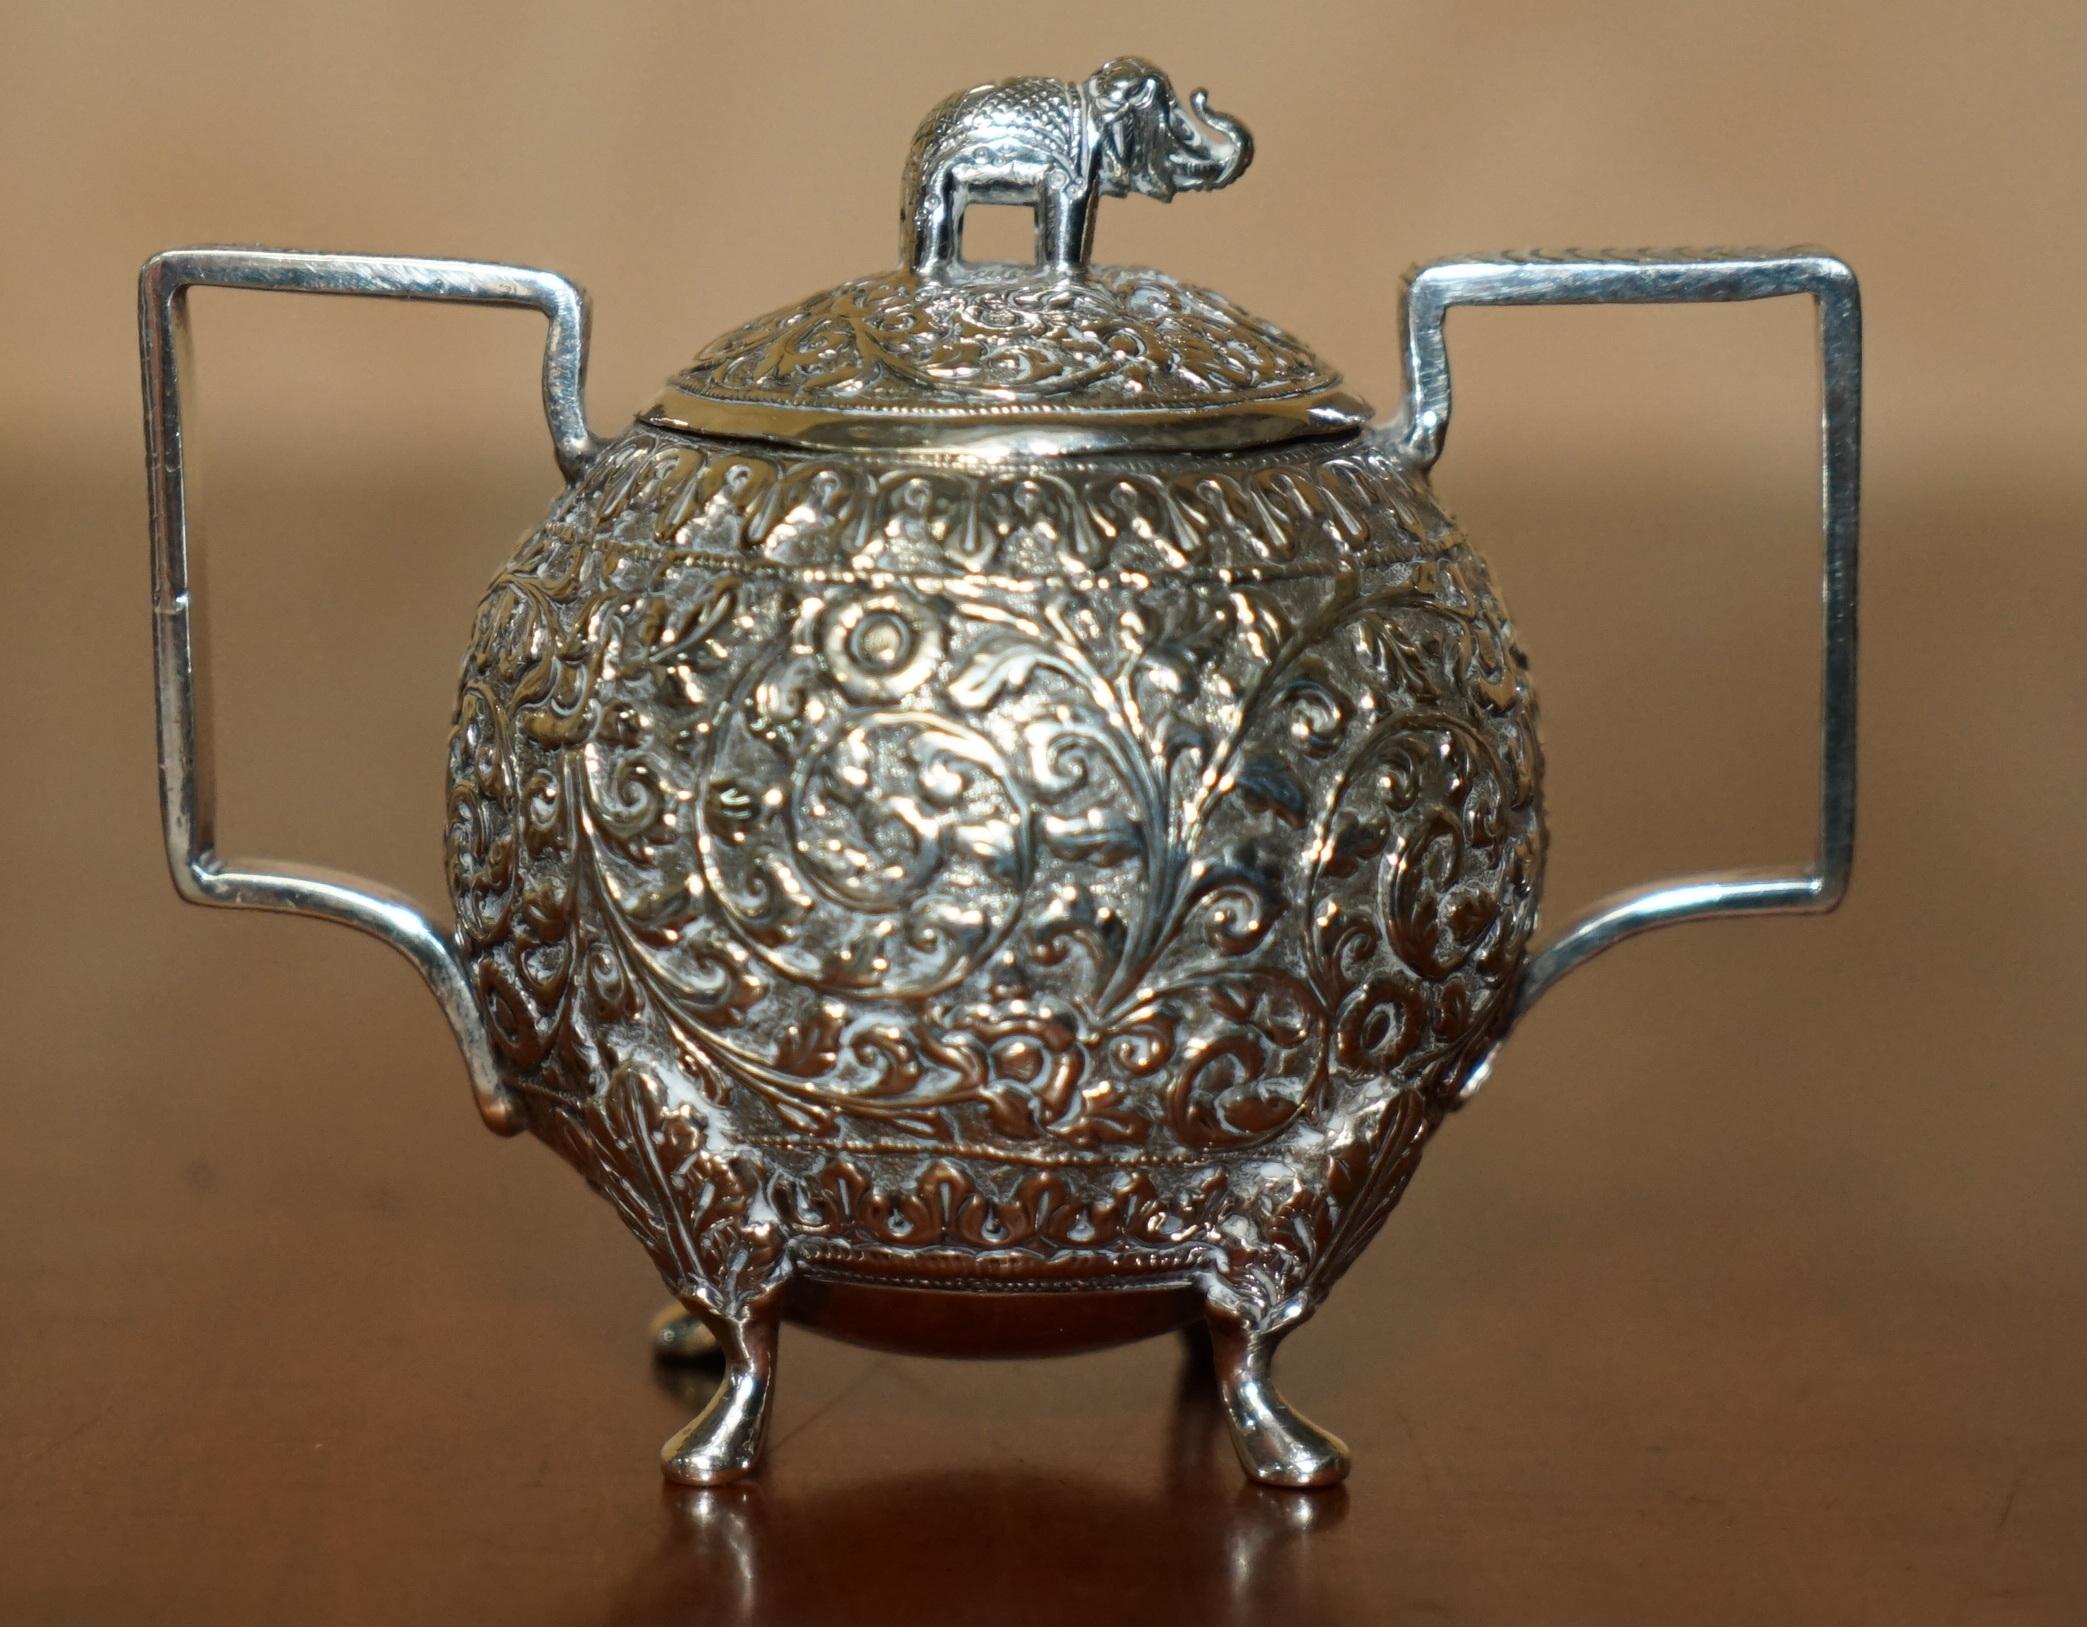 ANTIQUE INDIAN ELEPHANT COLONIAL SOLiD SILVER TEA SERVICE OOMERSI MAWJI & SONS For Sale 8